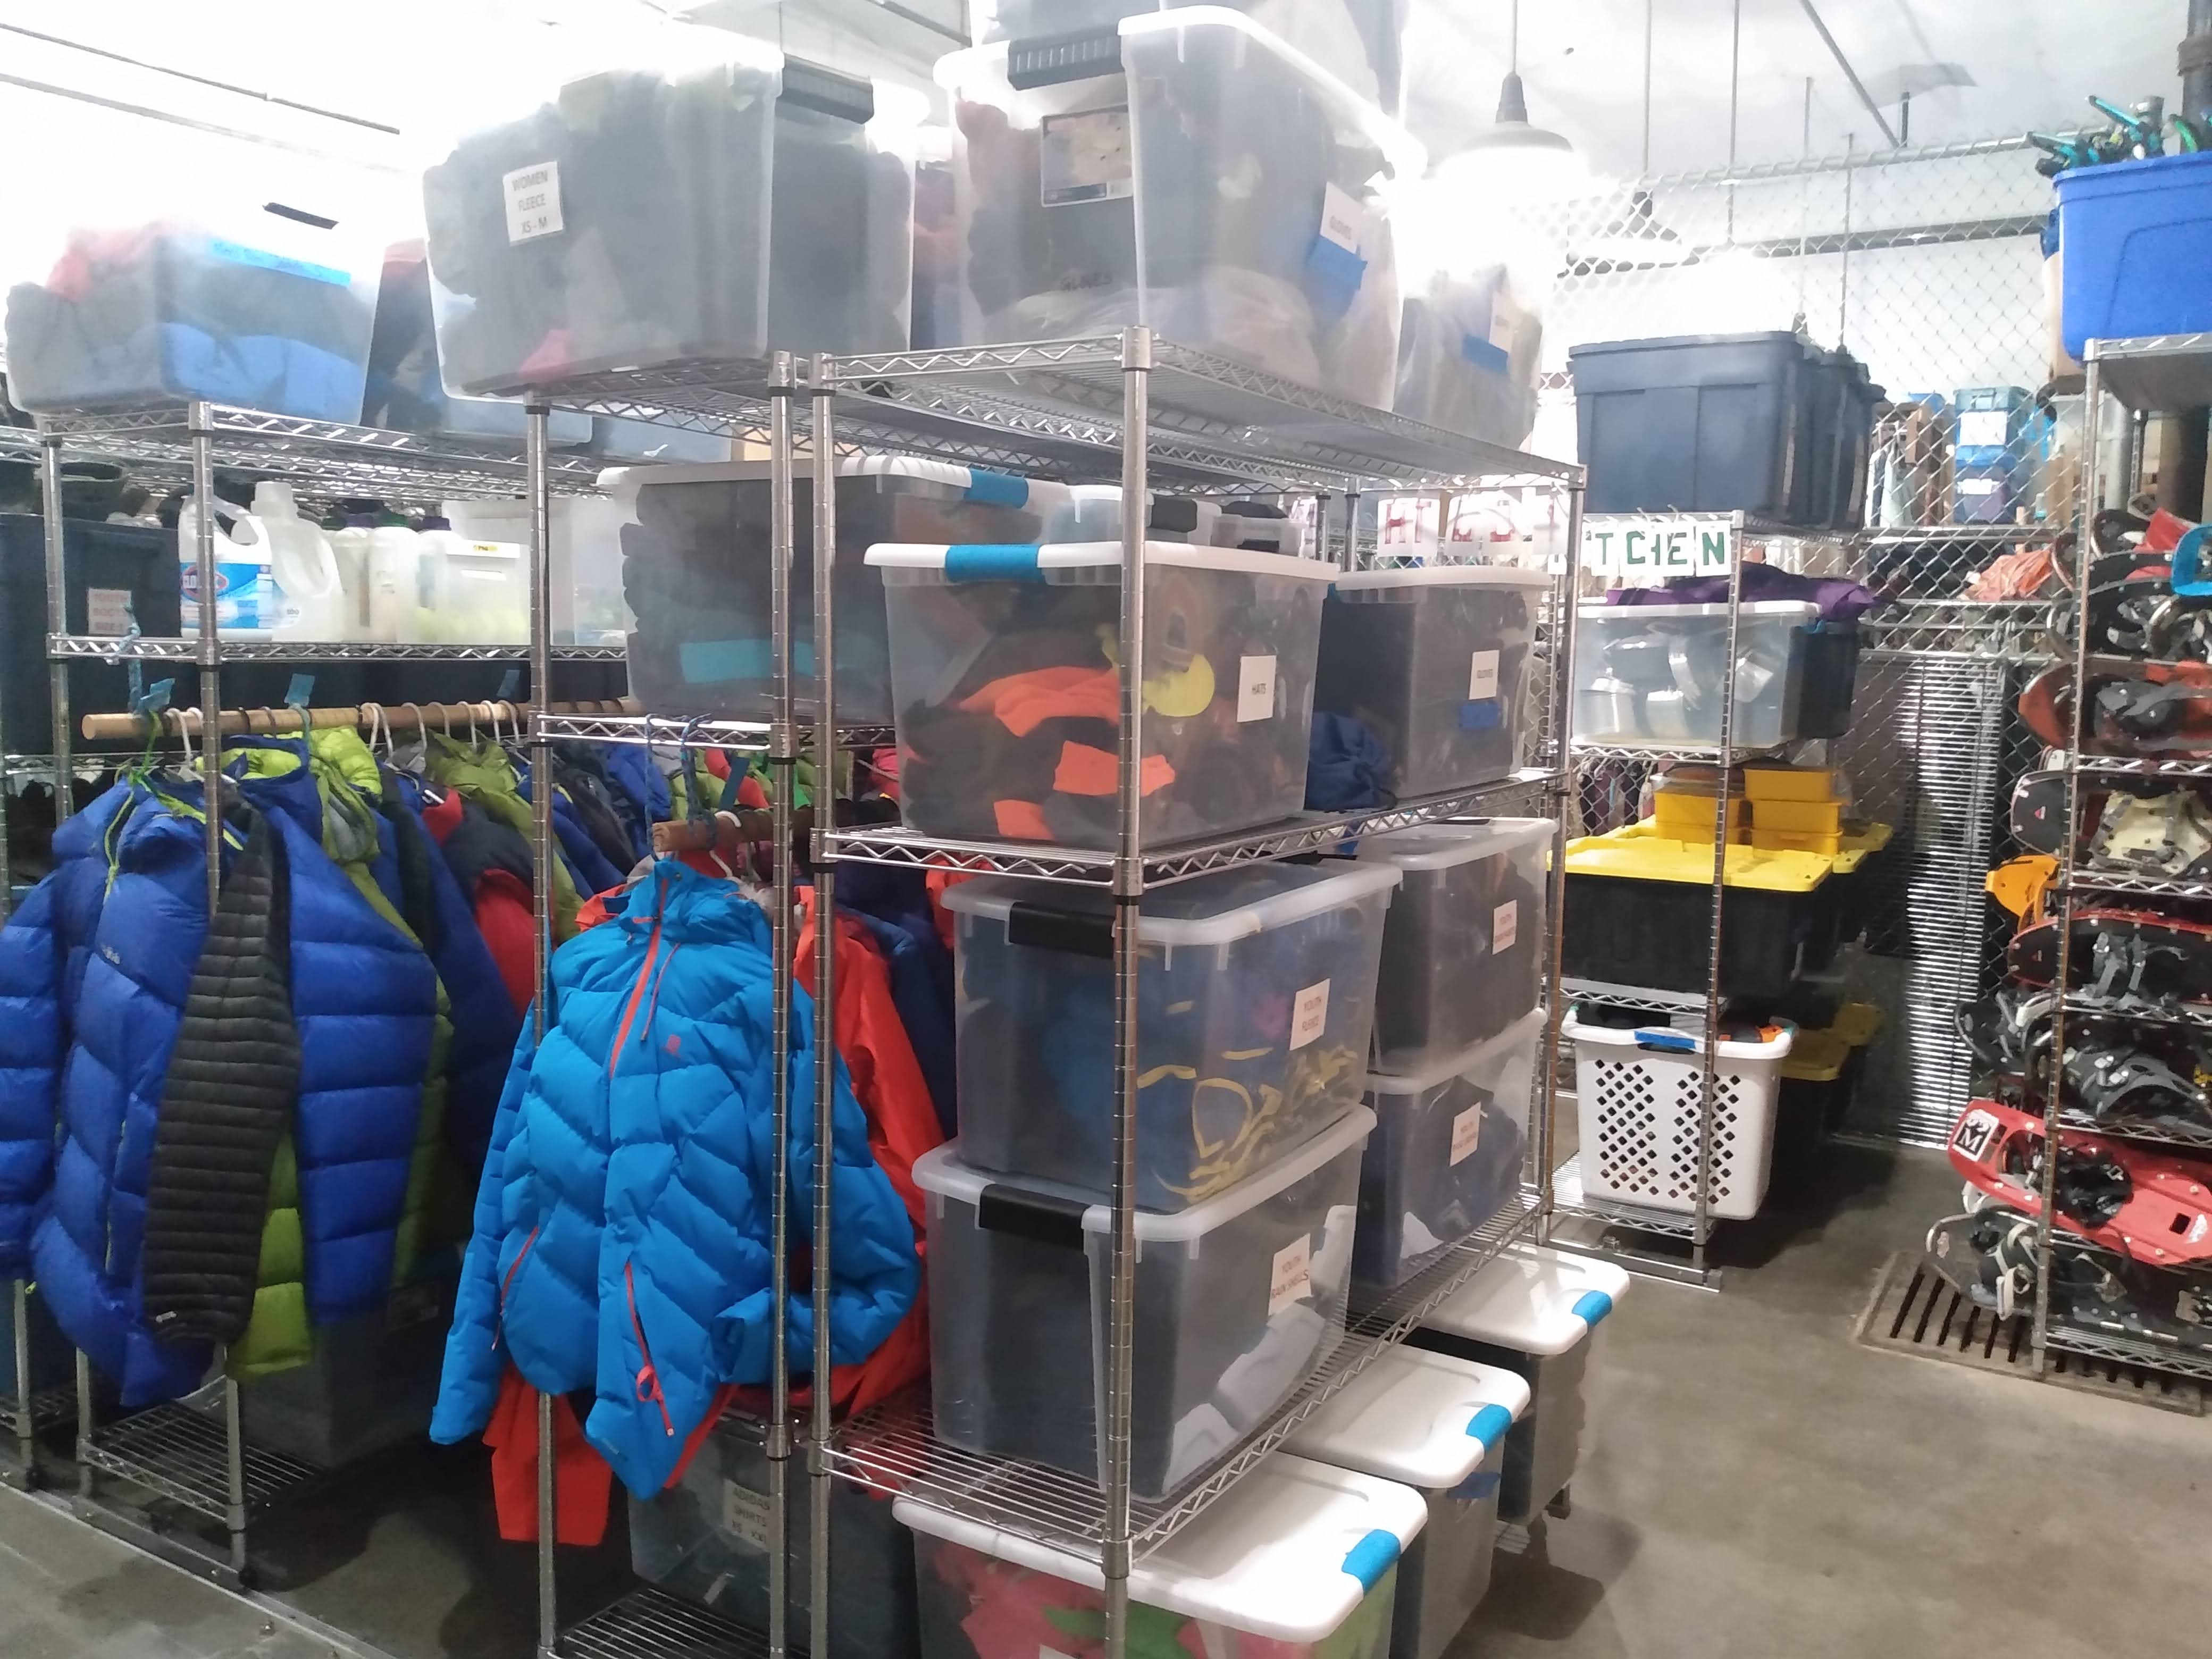 A room is filled with gear stored on shelves and hooks